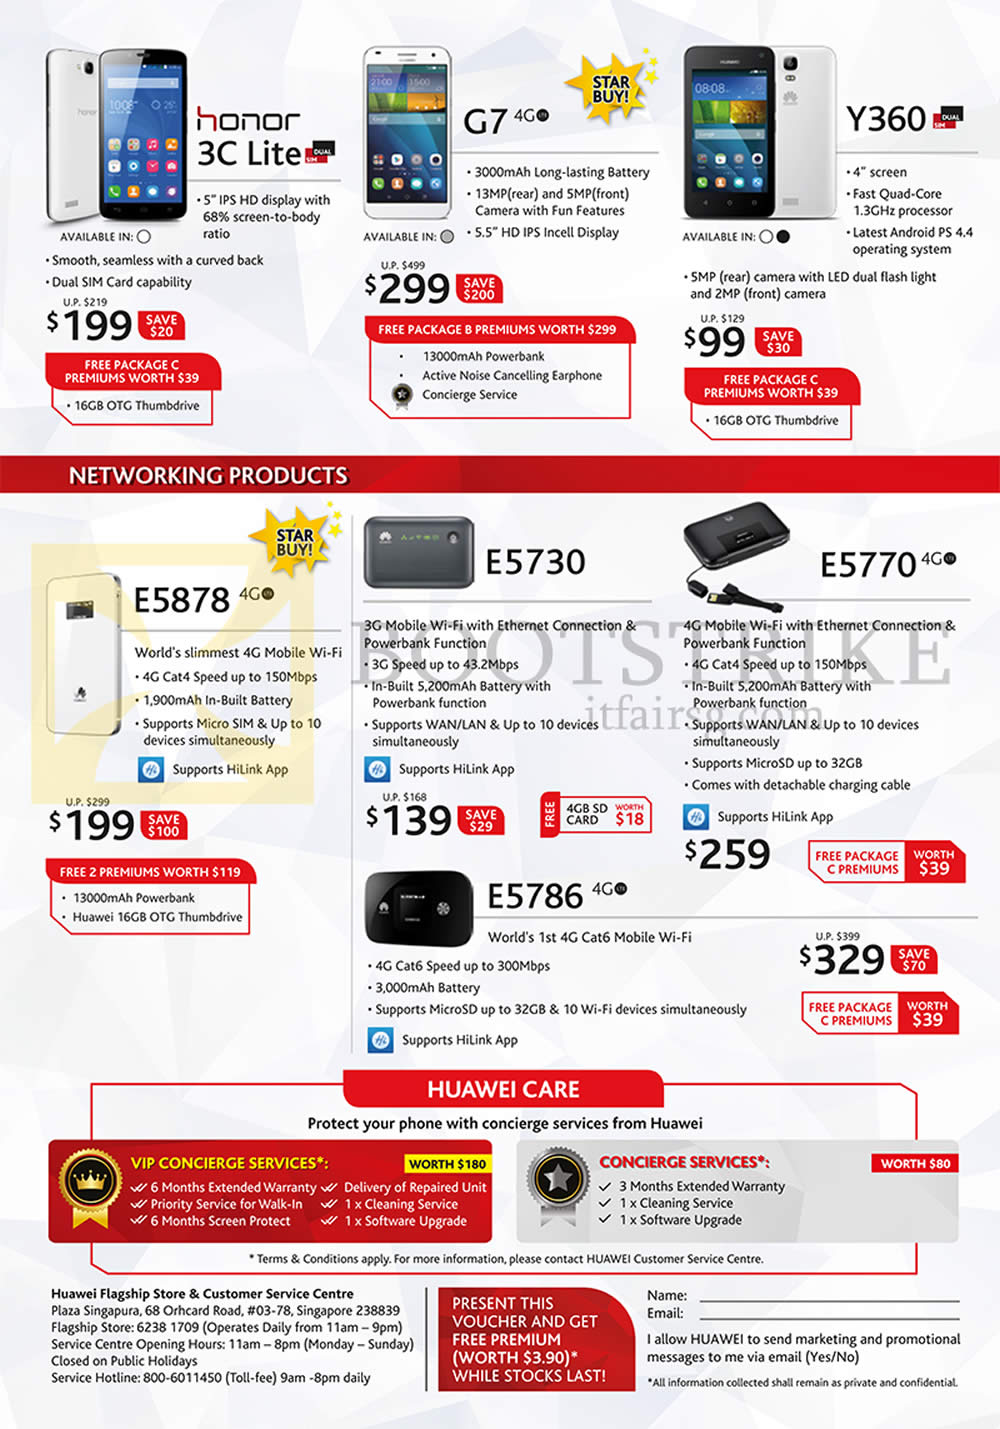 COMEX 2015 price list image brochure of Huawei Mobile Phones, Networking Products, Mobile Wi-fi, Huawei Care, Honor 3C Lite, G7, Y360, E5878, E5730, E5770, E5786